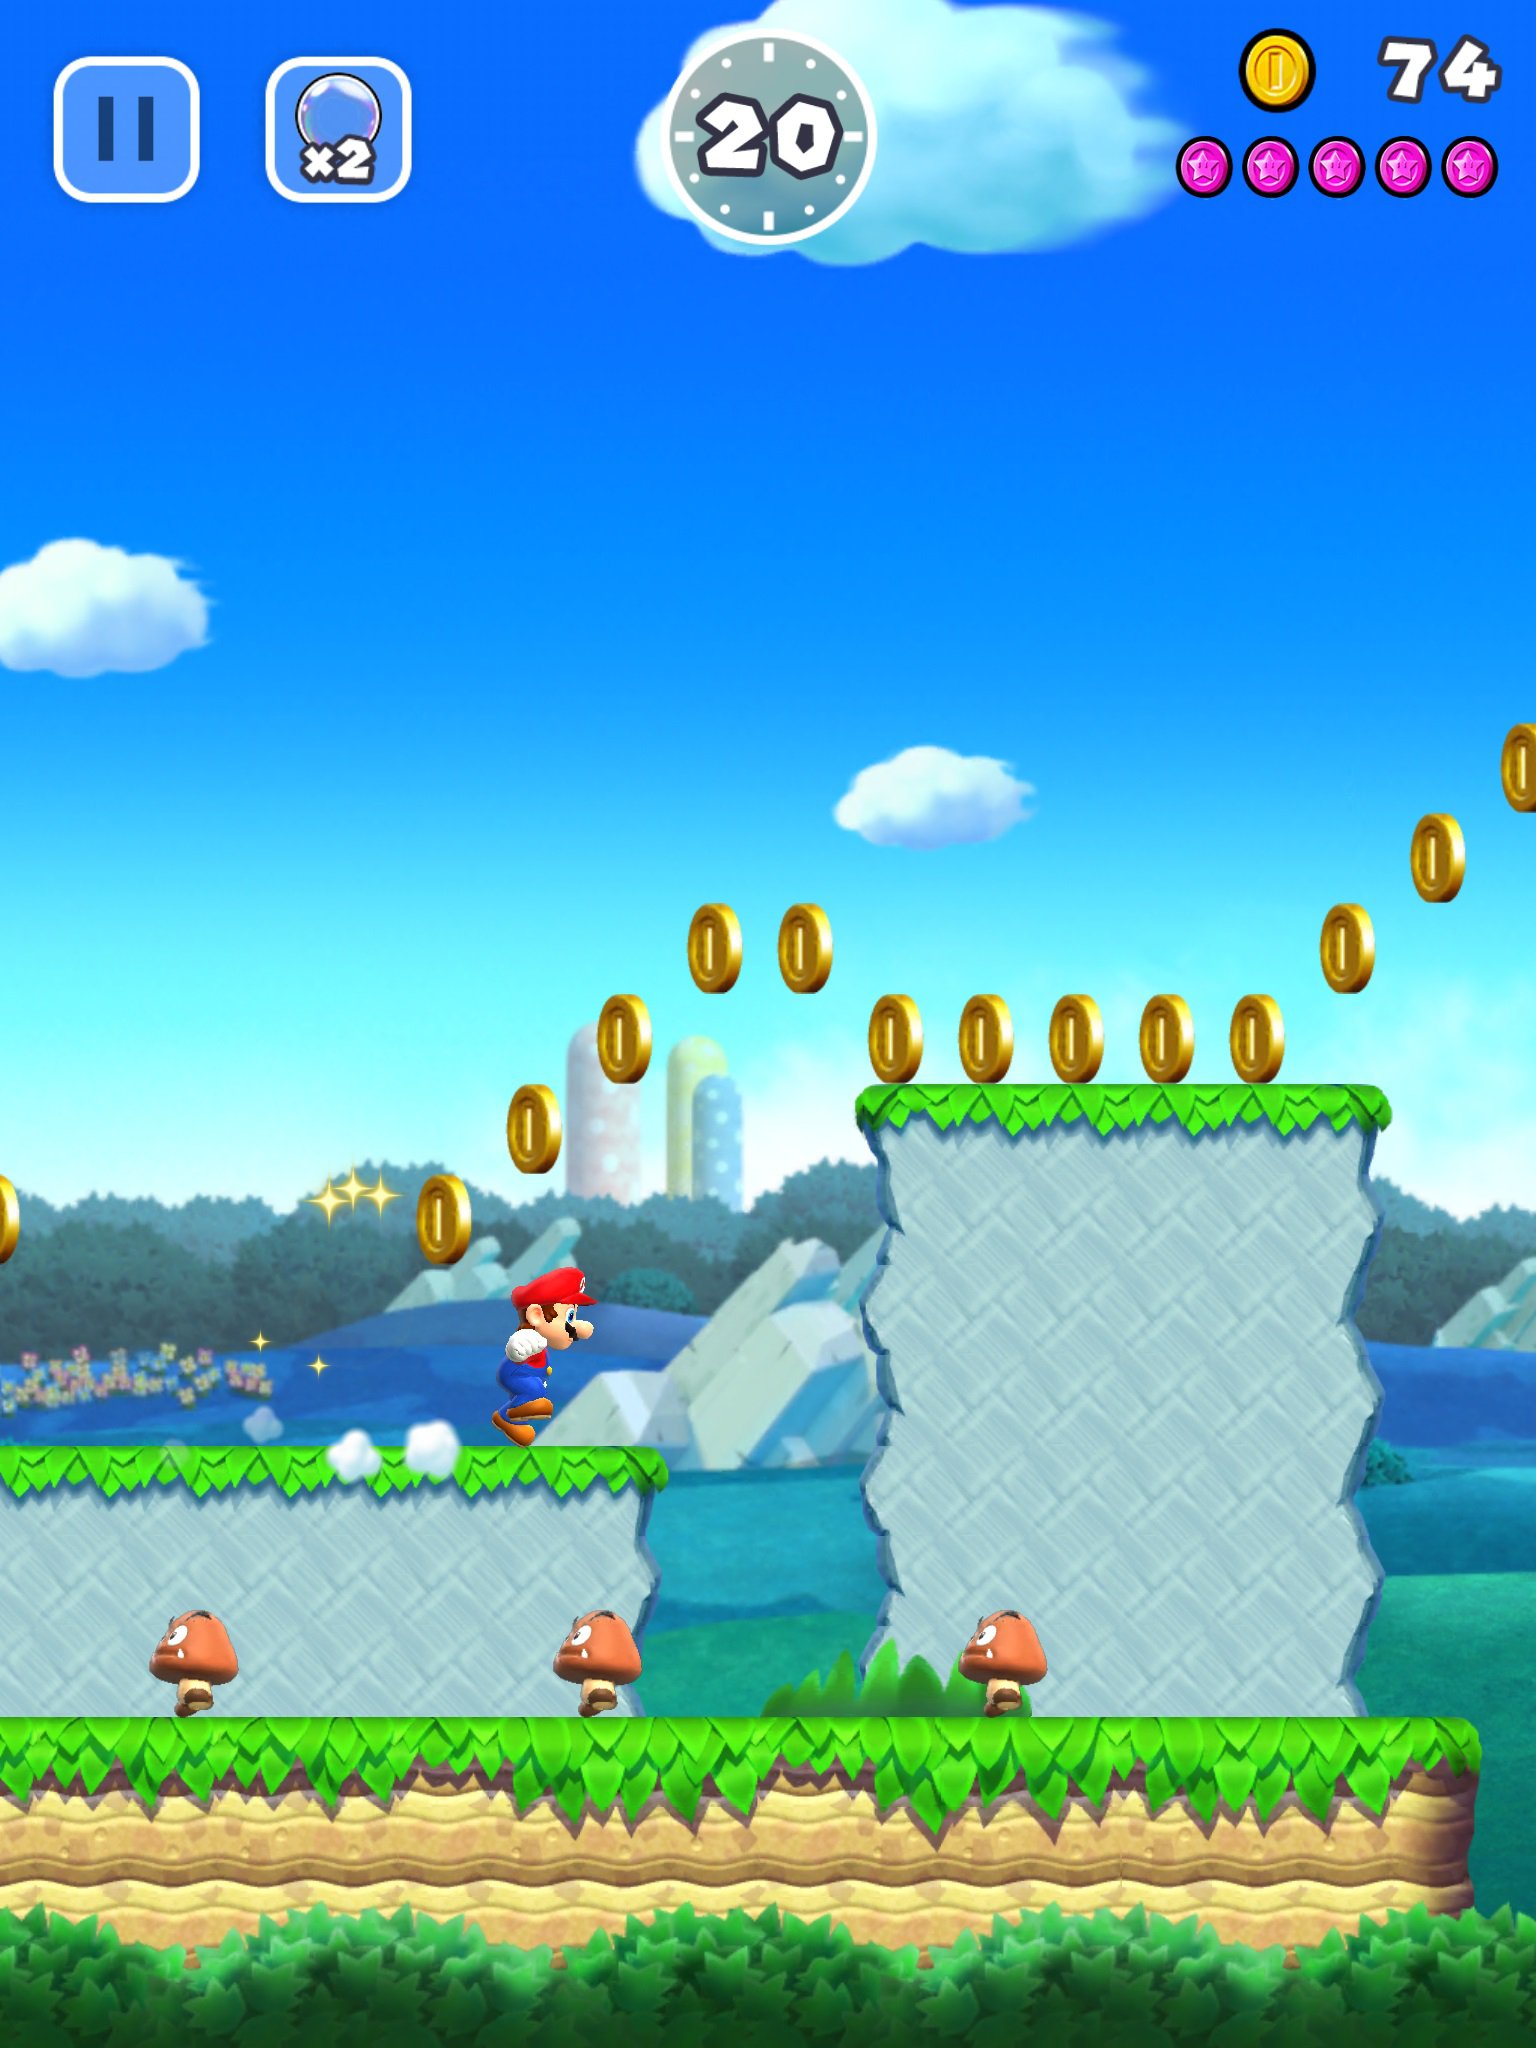 Download Super Mario For Android 2.3.6